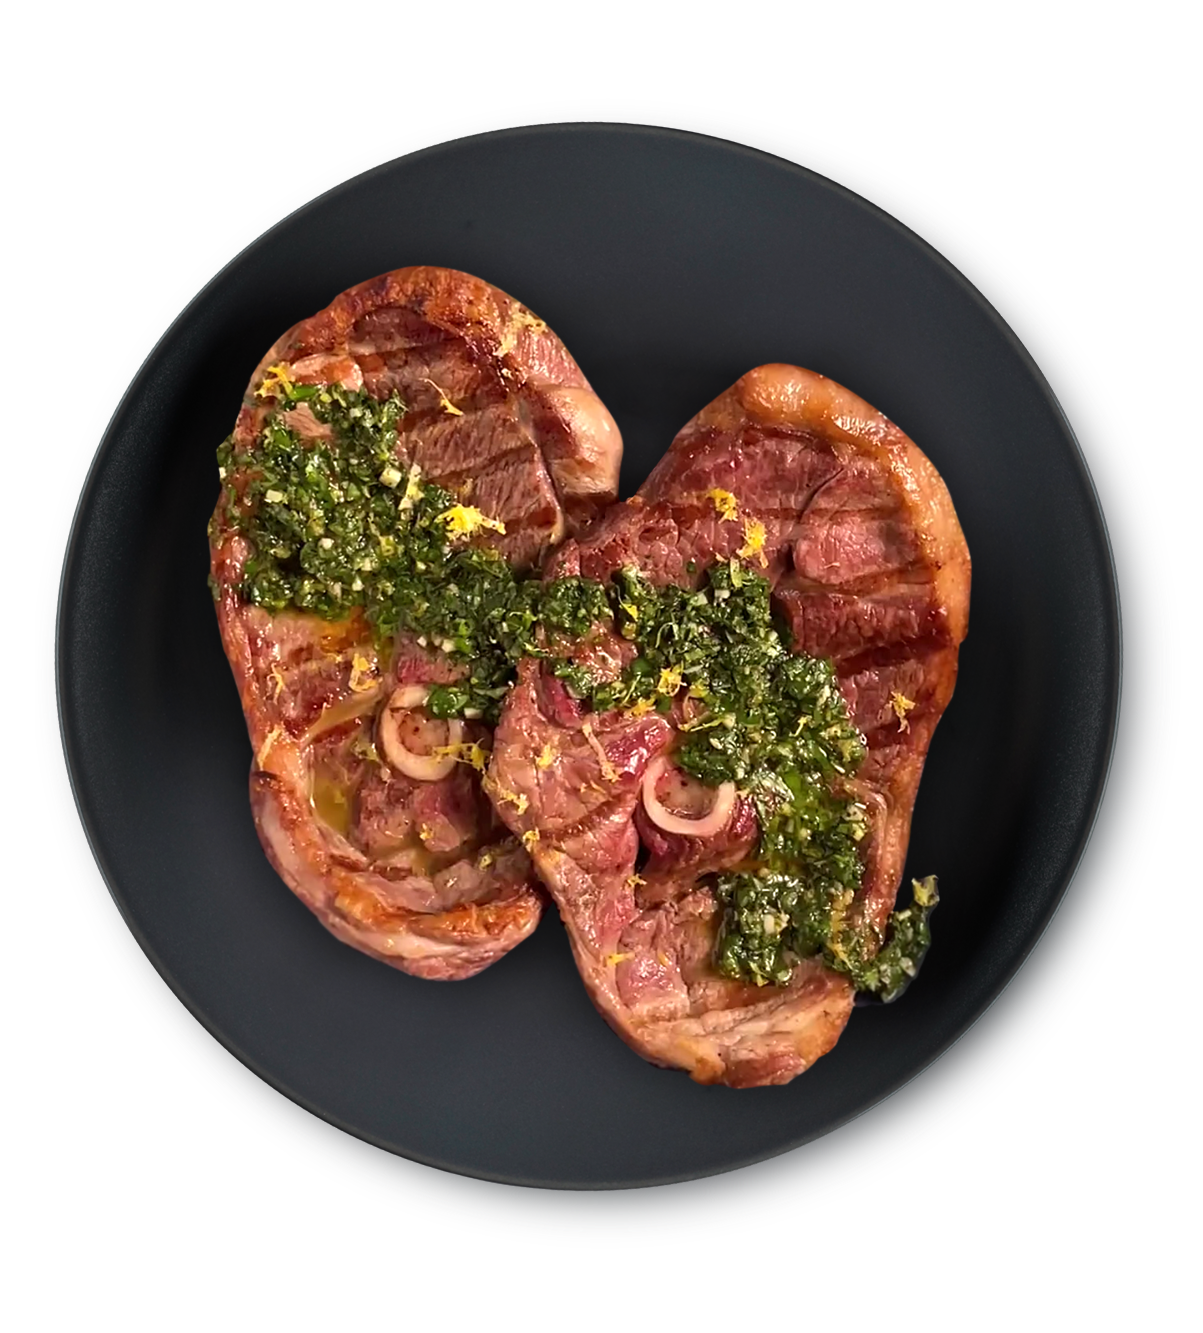 Slices of lamb with lemon oil and Asian gremolata